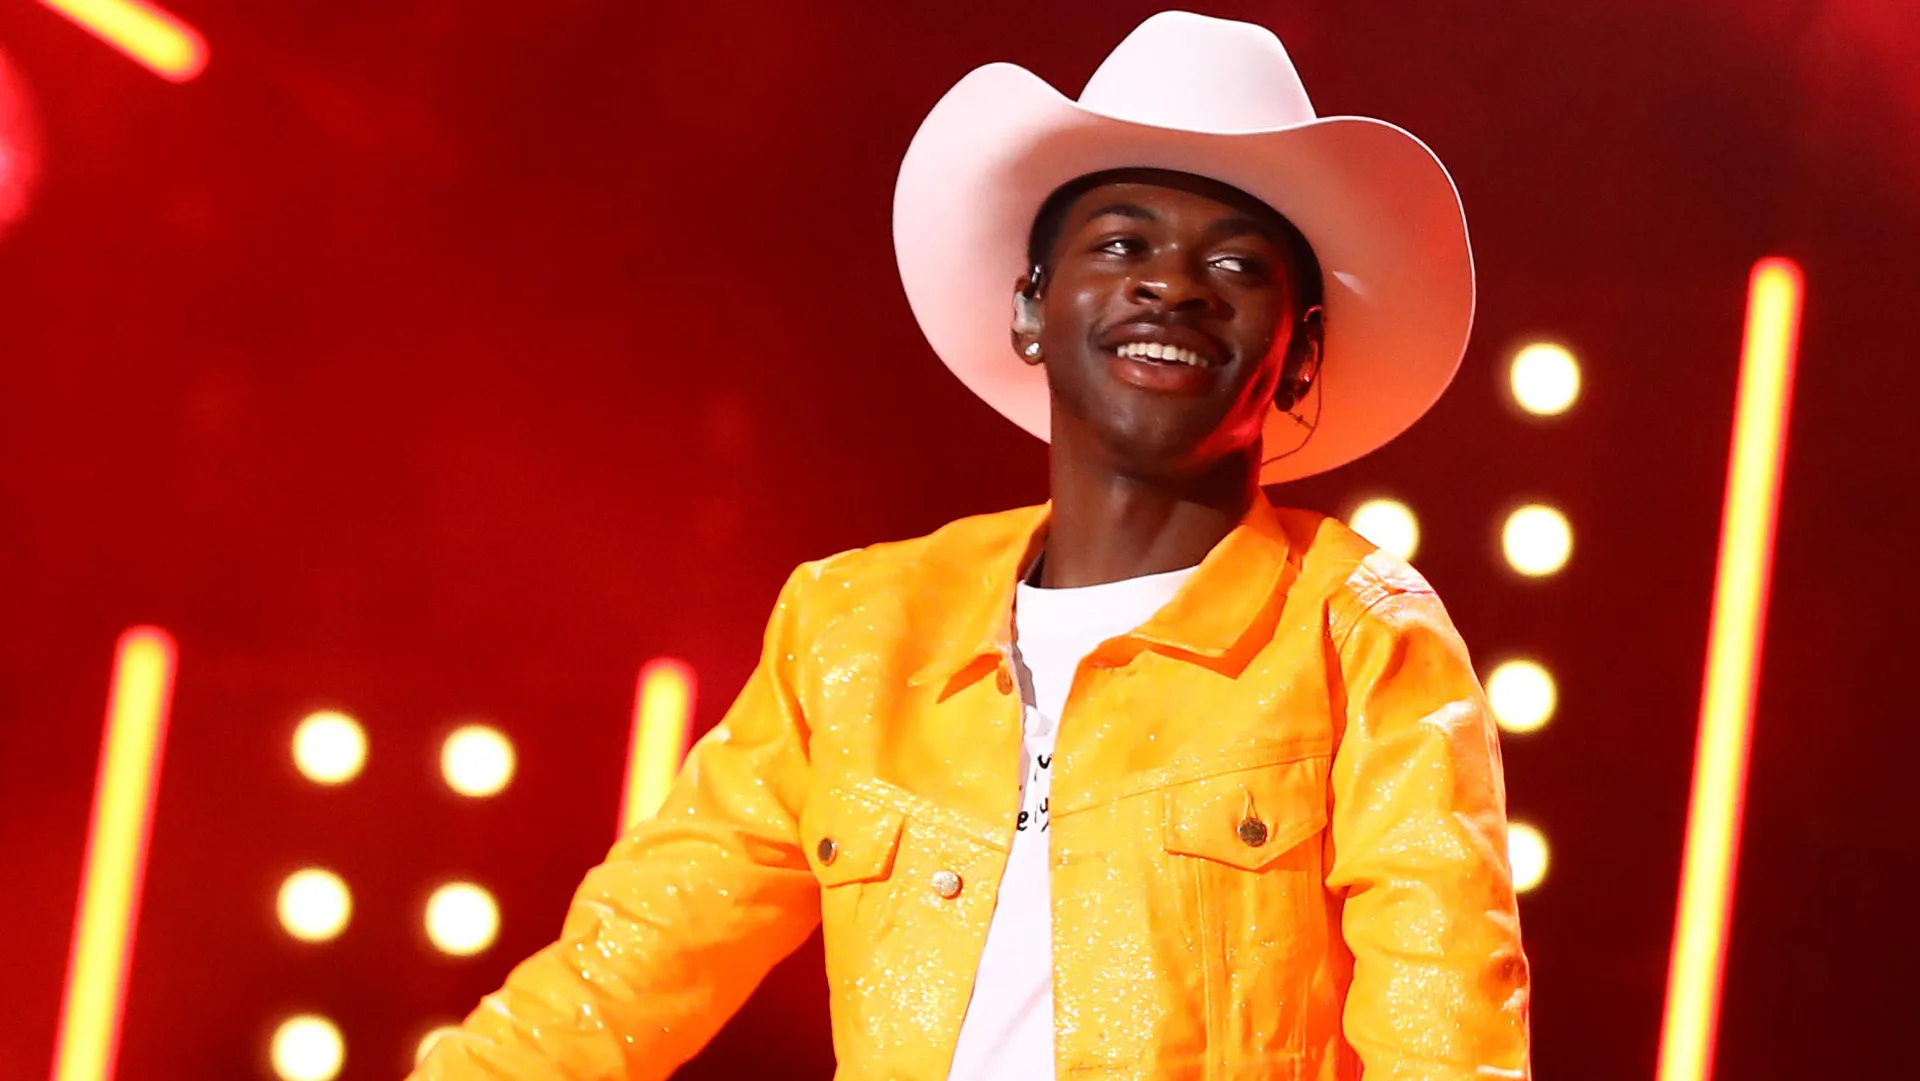 A photograph of Lil Nas wearing a cowboy hat and yellow jacket smiling to the side against a red background with lights